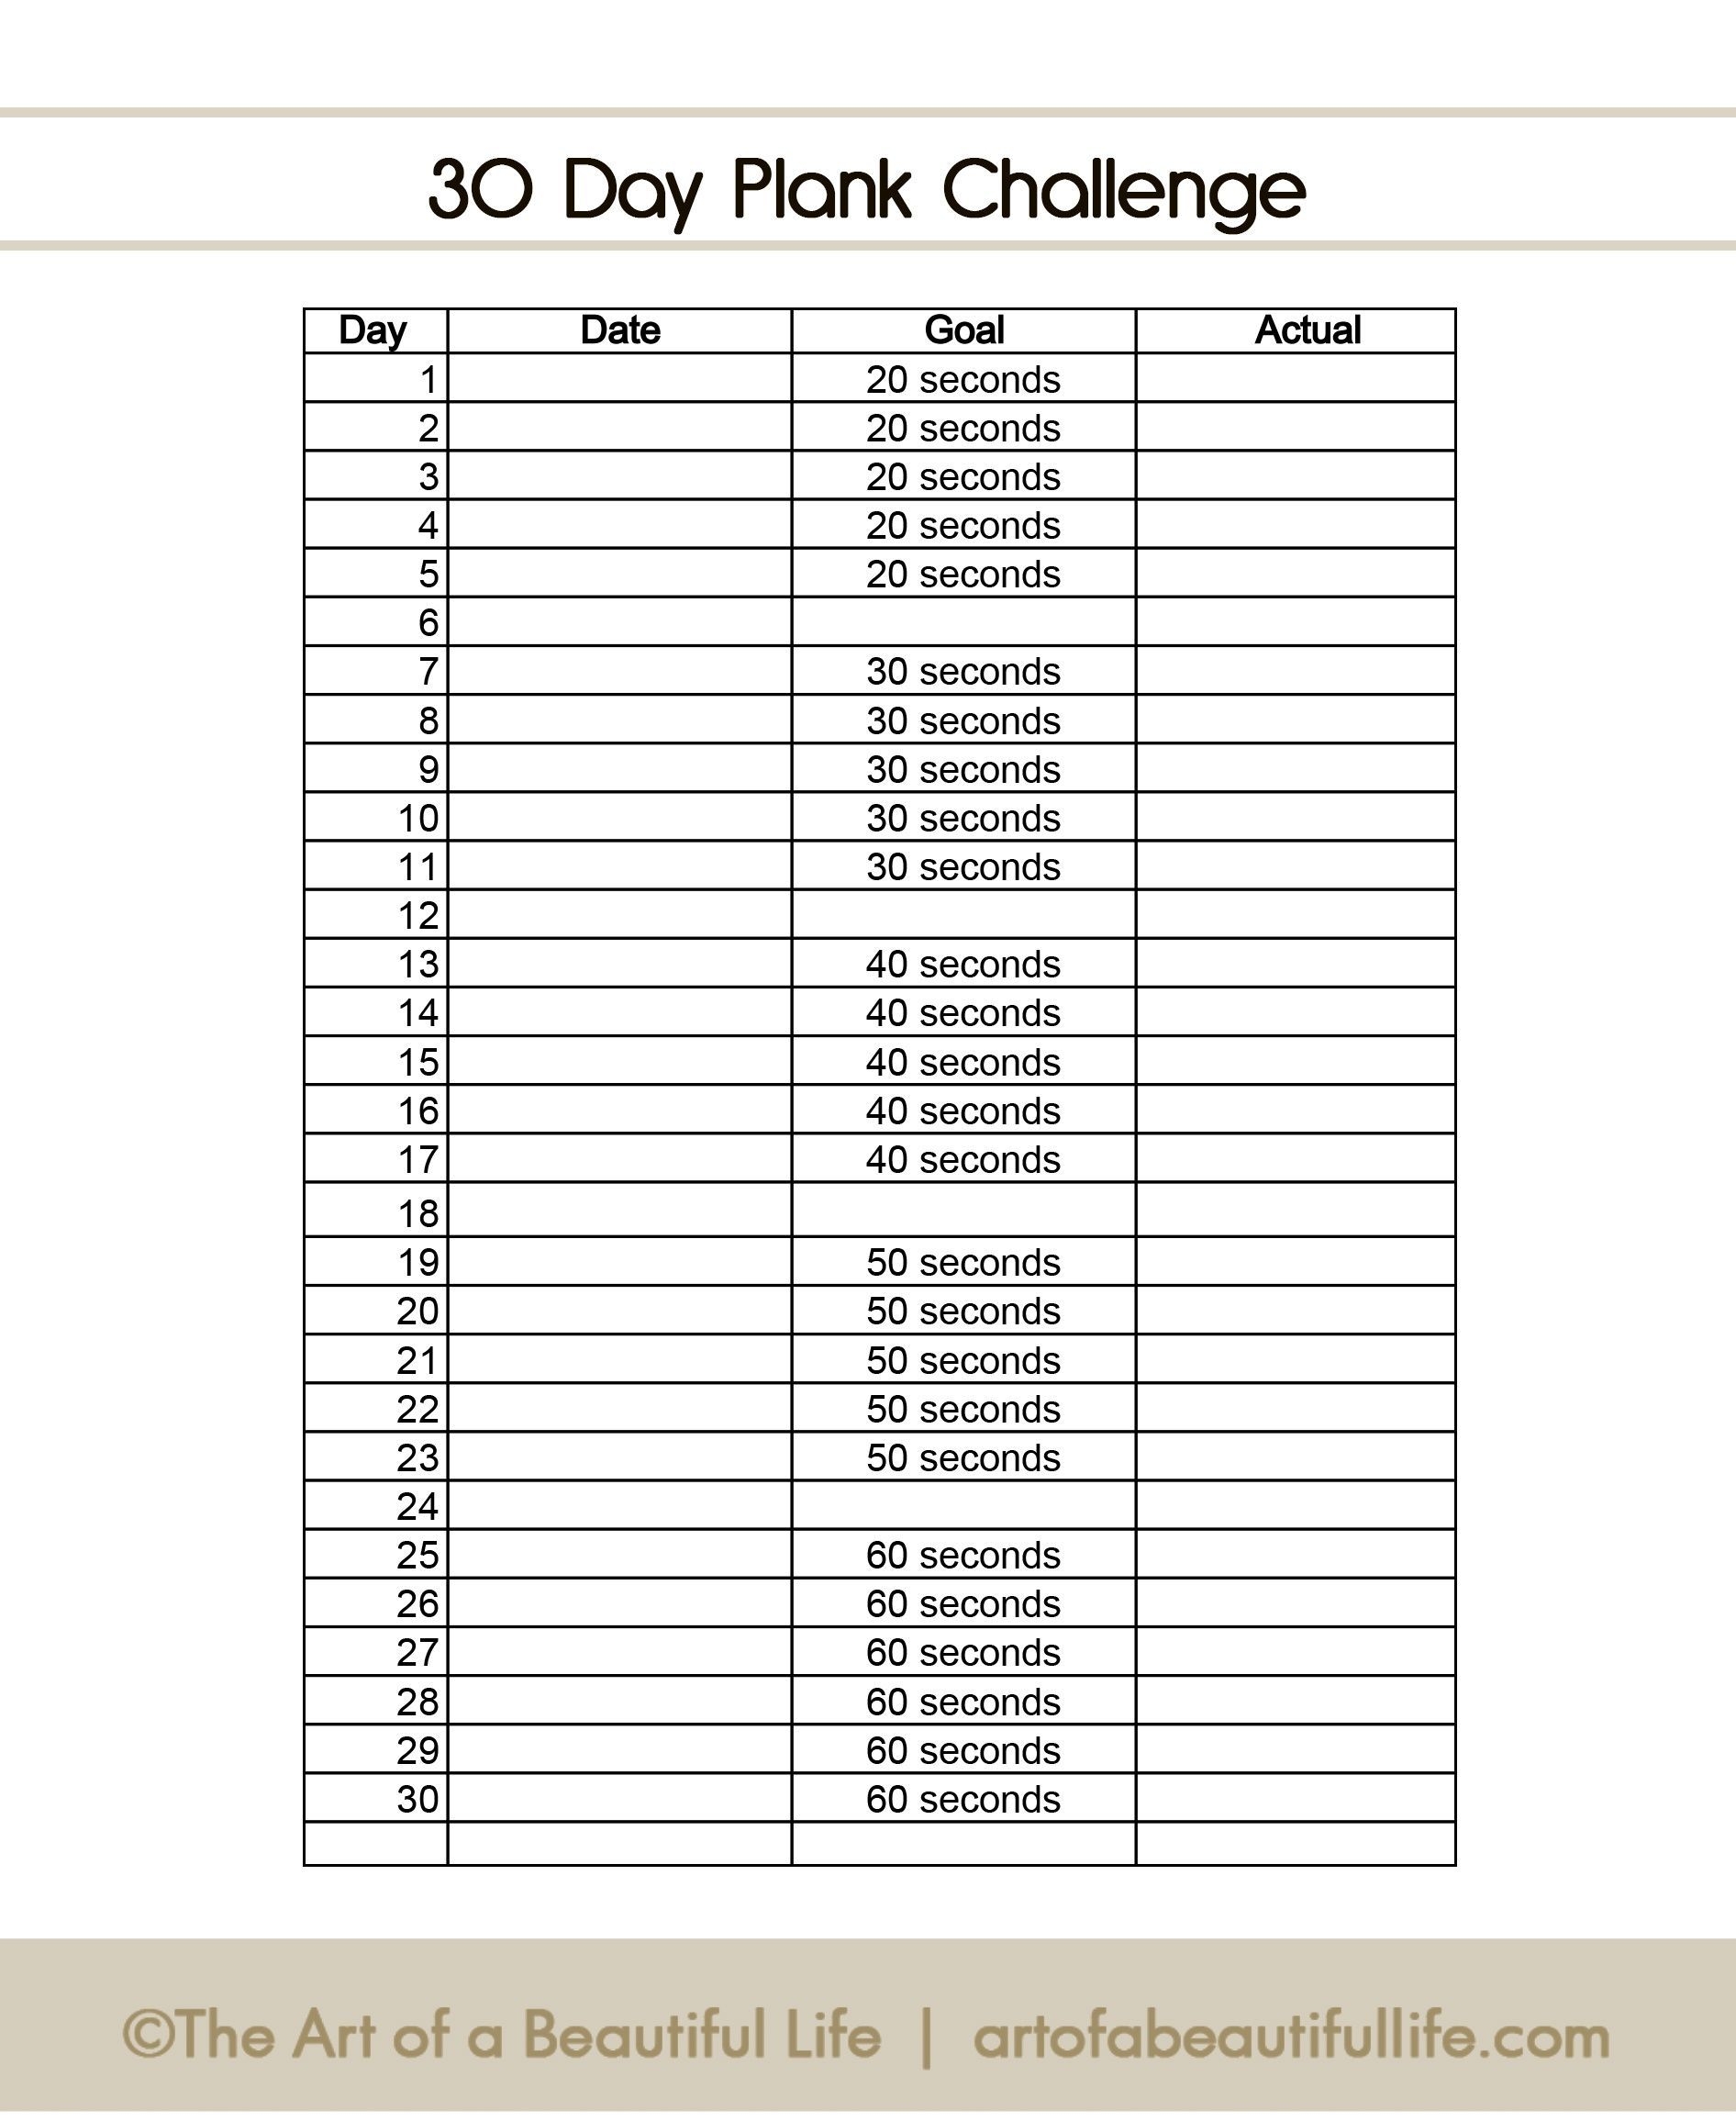 Plank Challenge 30 Day Chart - - Yahoo Search Results | 30